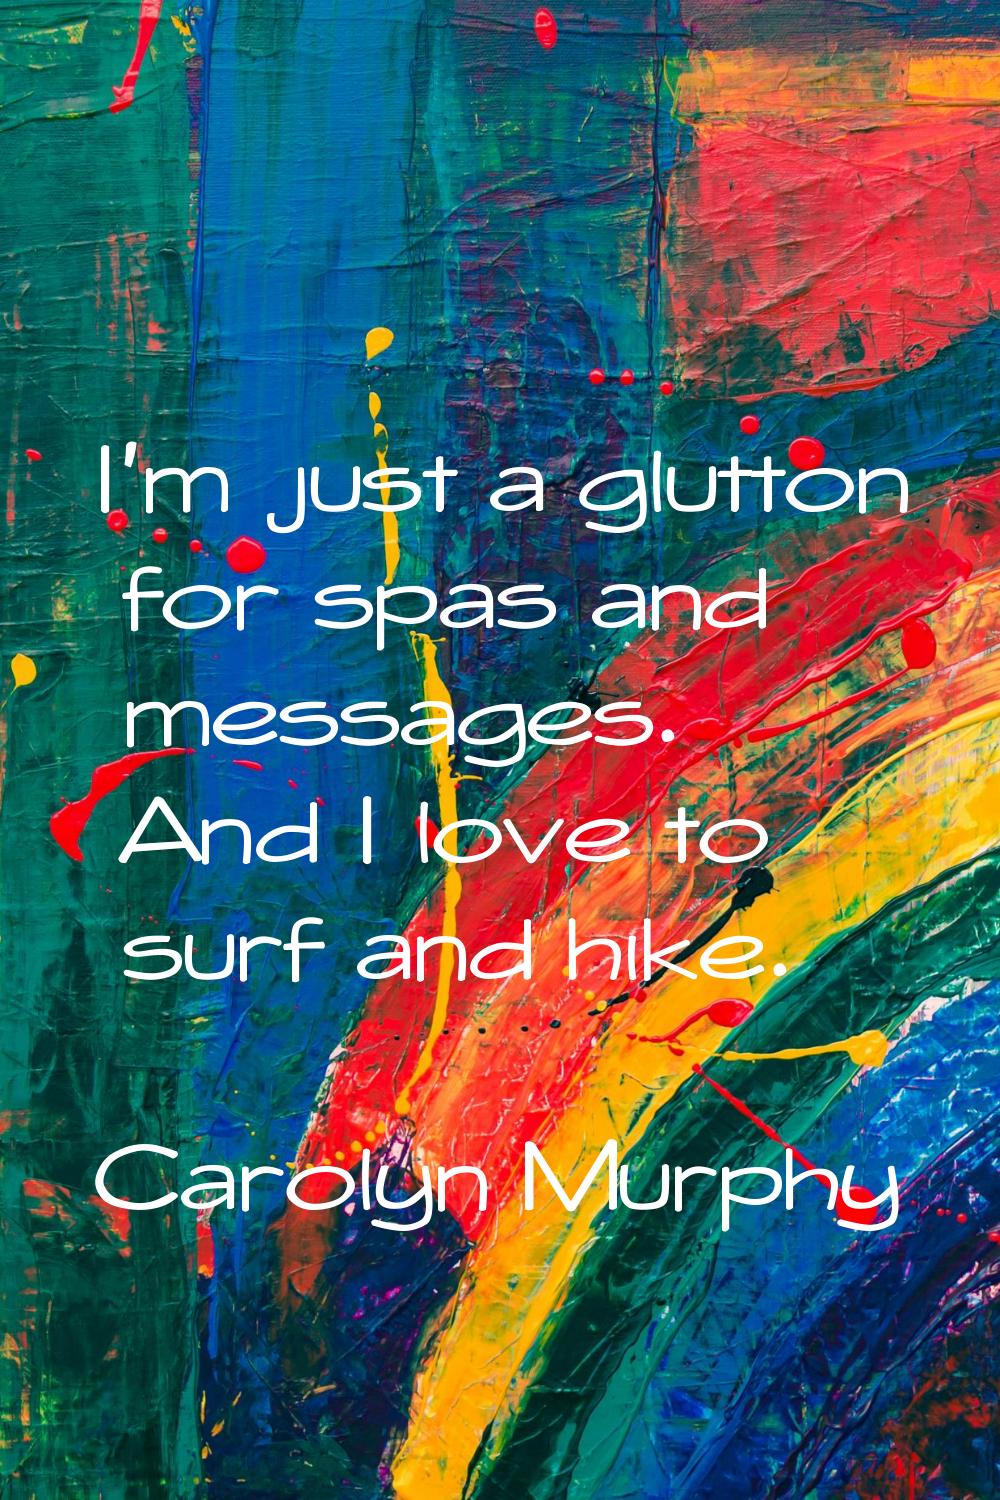 I'm just a glutton for spas and messages. And I love to surf and hike.